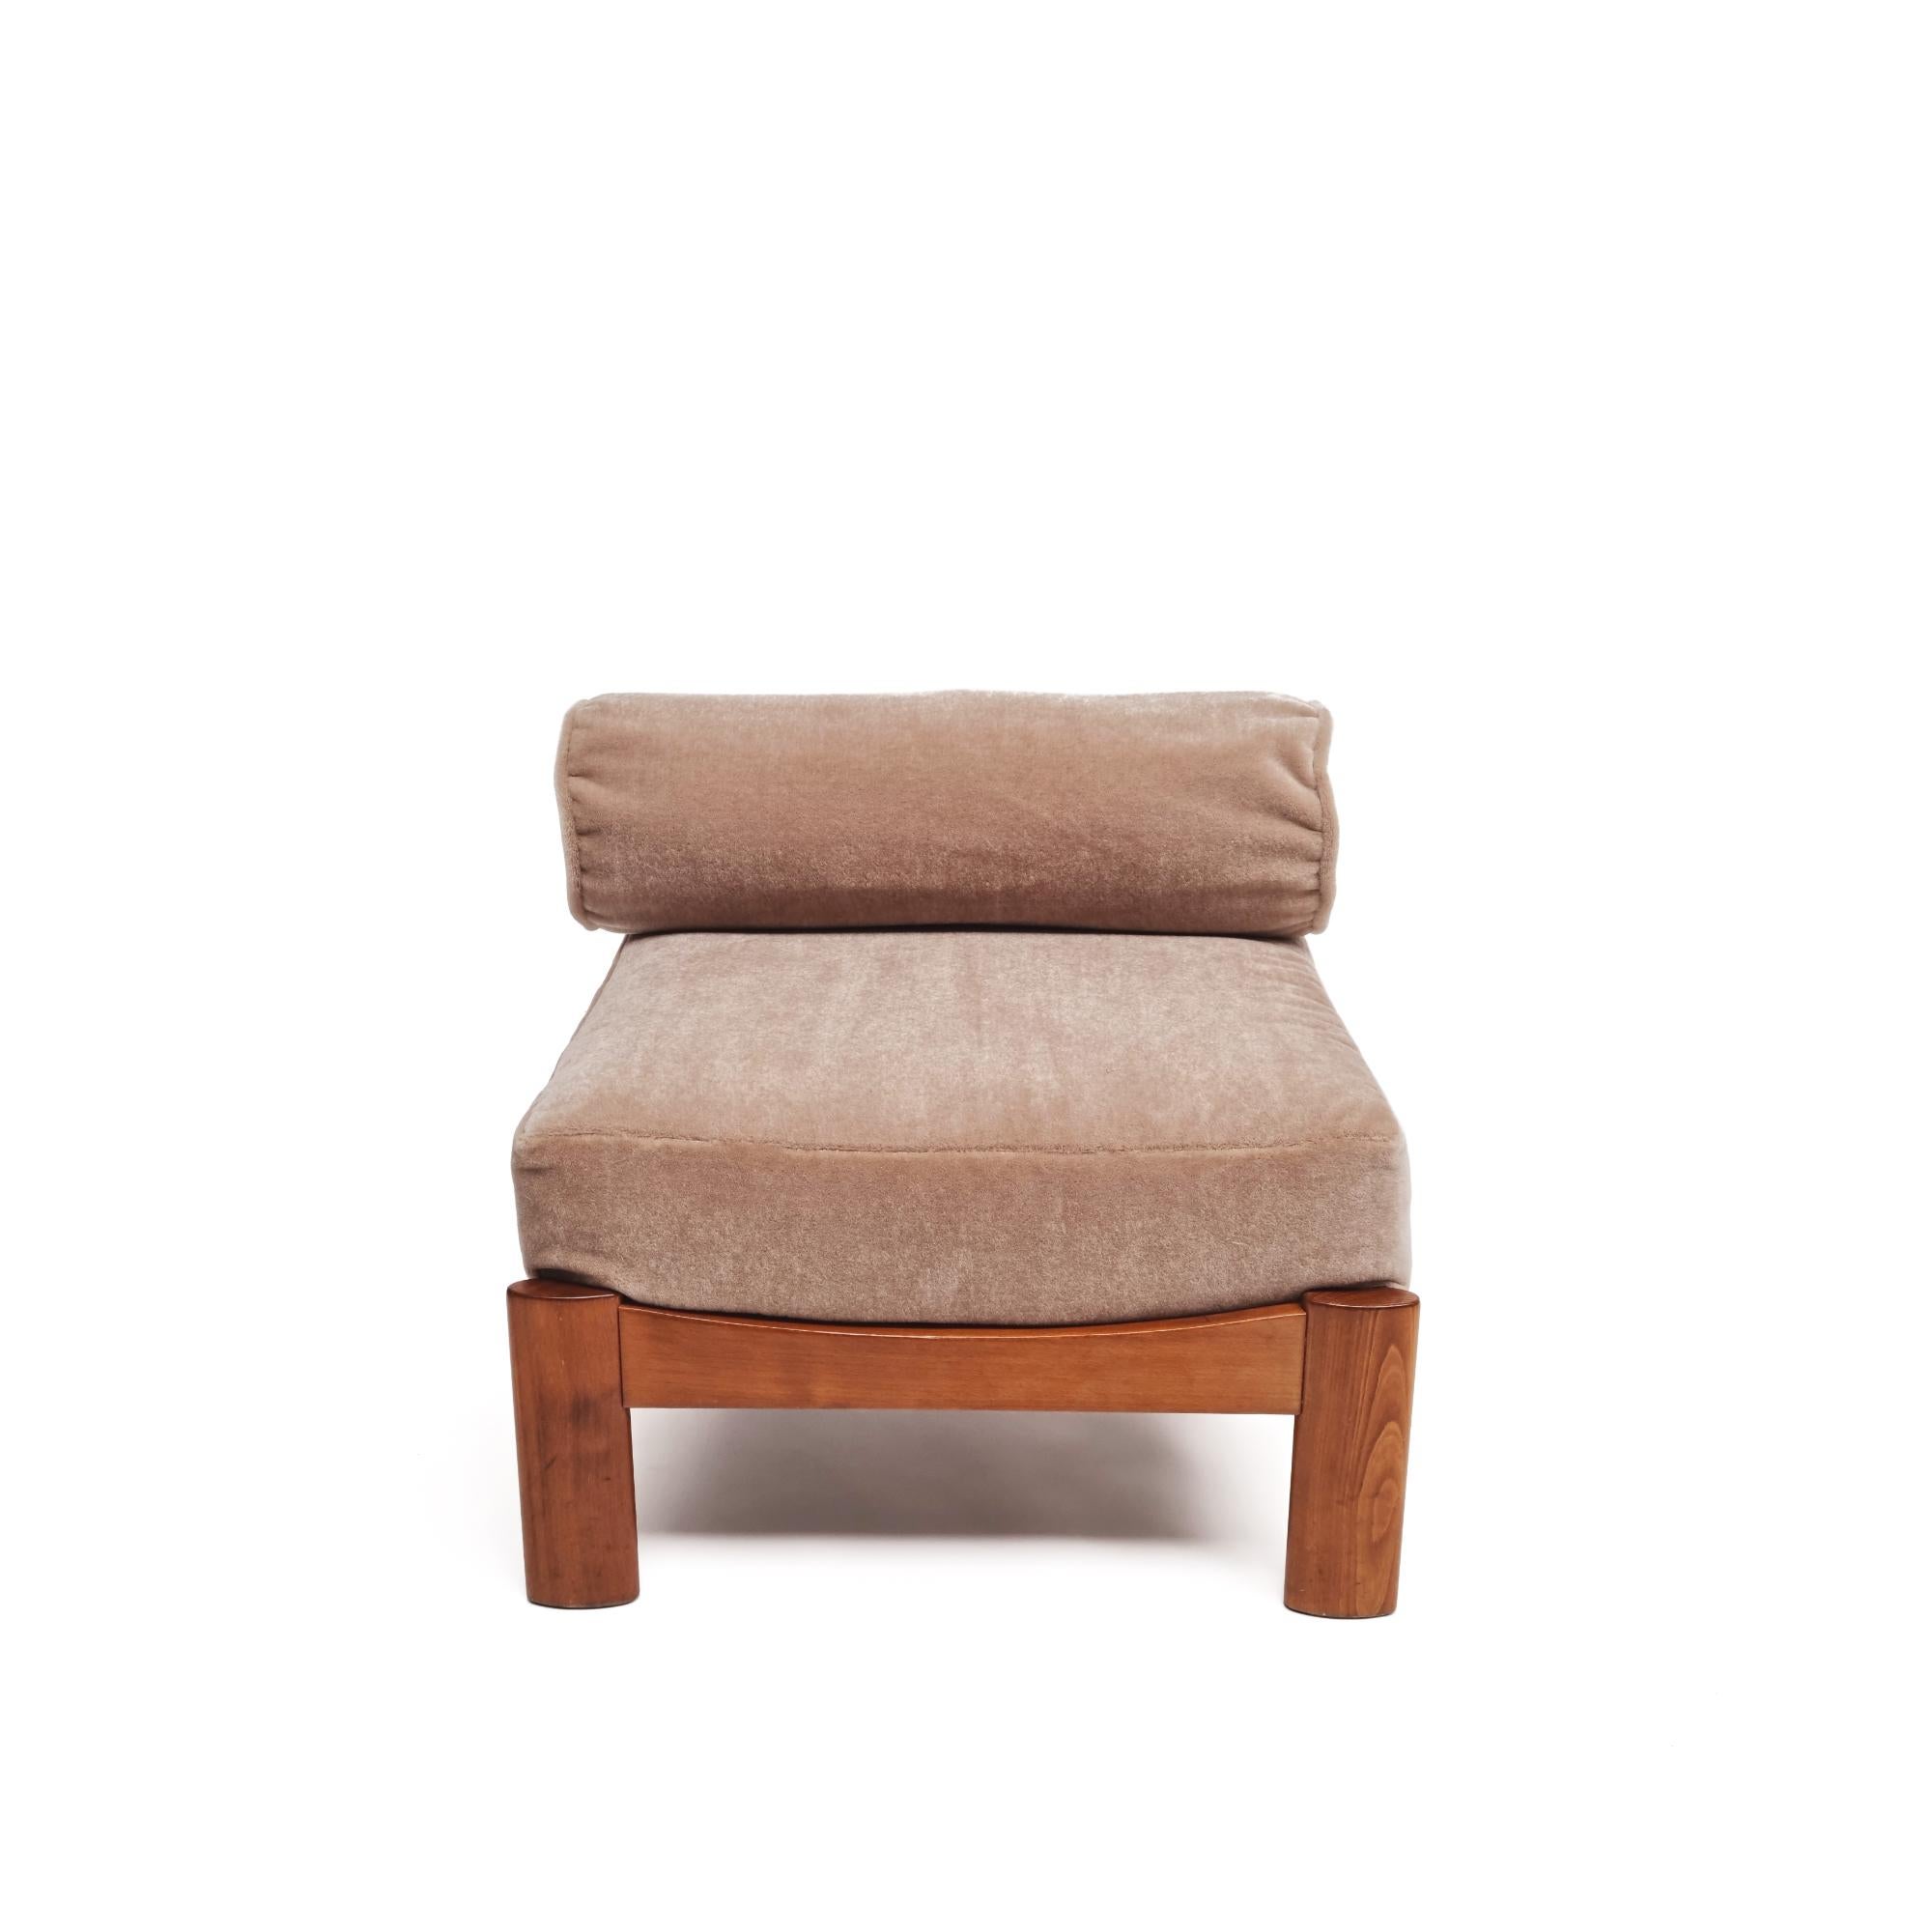 Mid-Century Modern Rolf Benz’ Modular 1970s Sofa Chair, Reupholstered In Mohair Wool For Sale